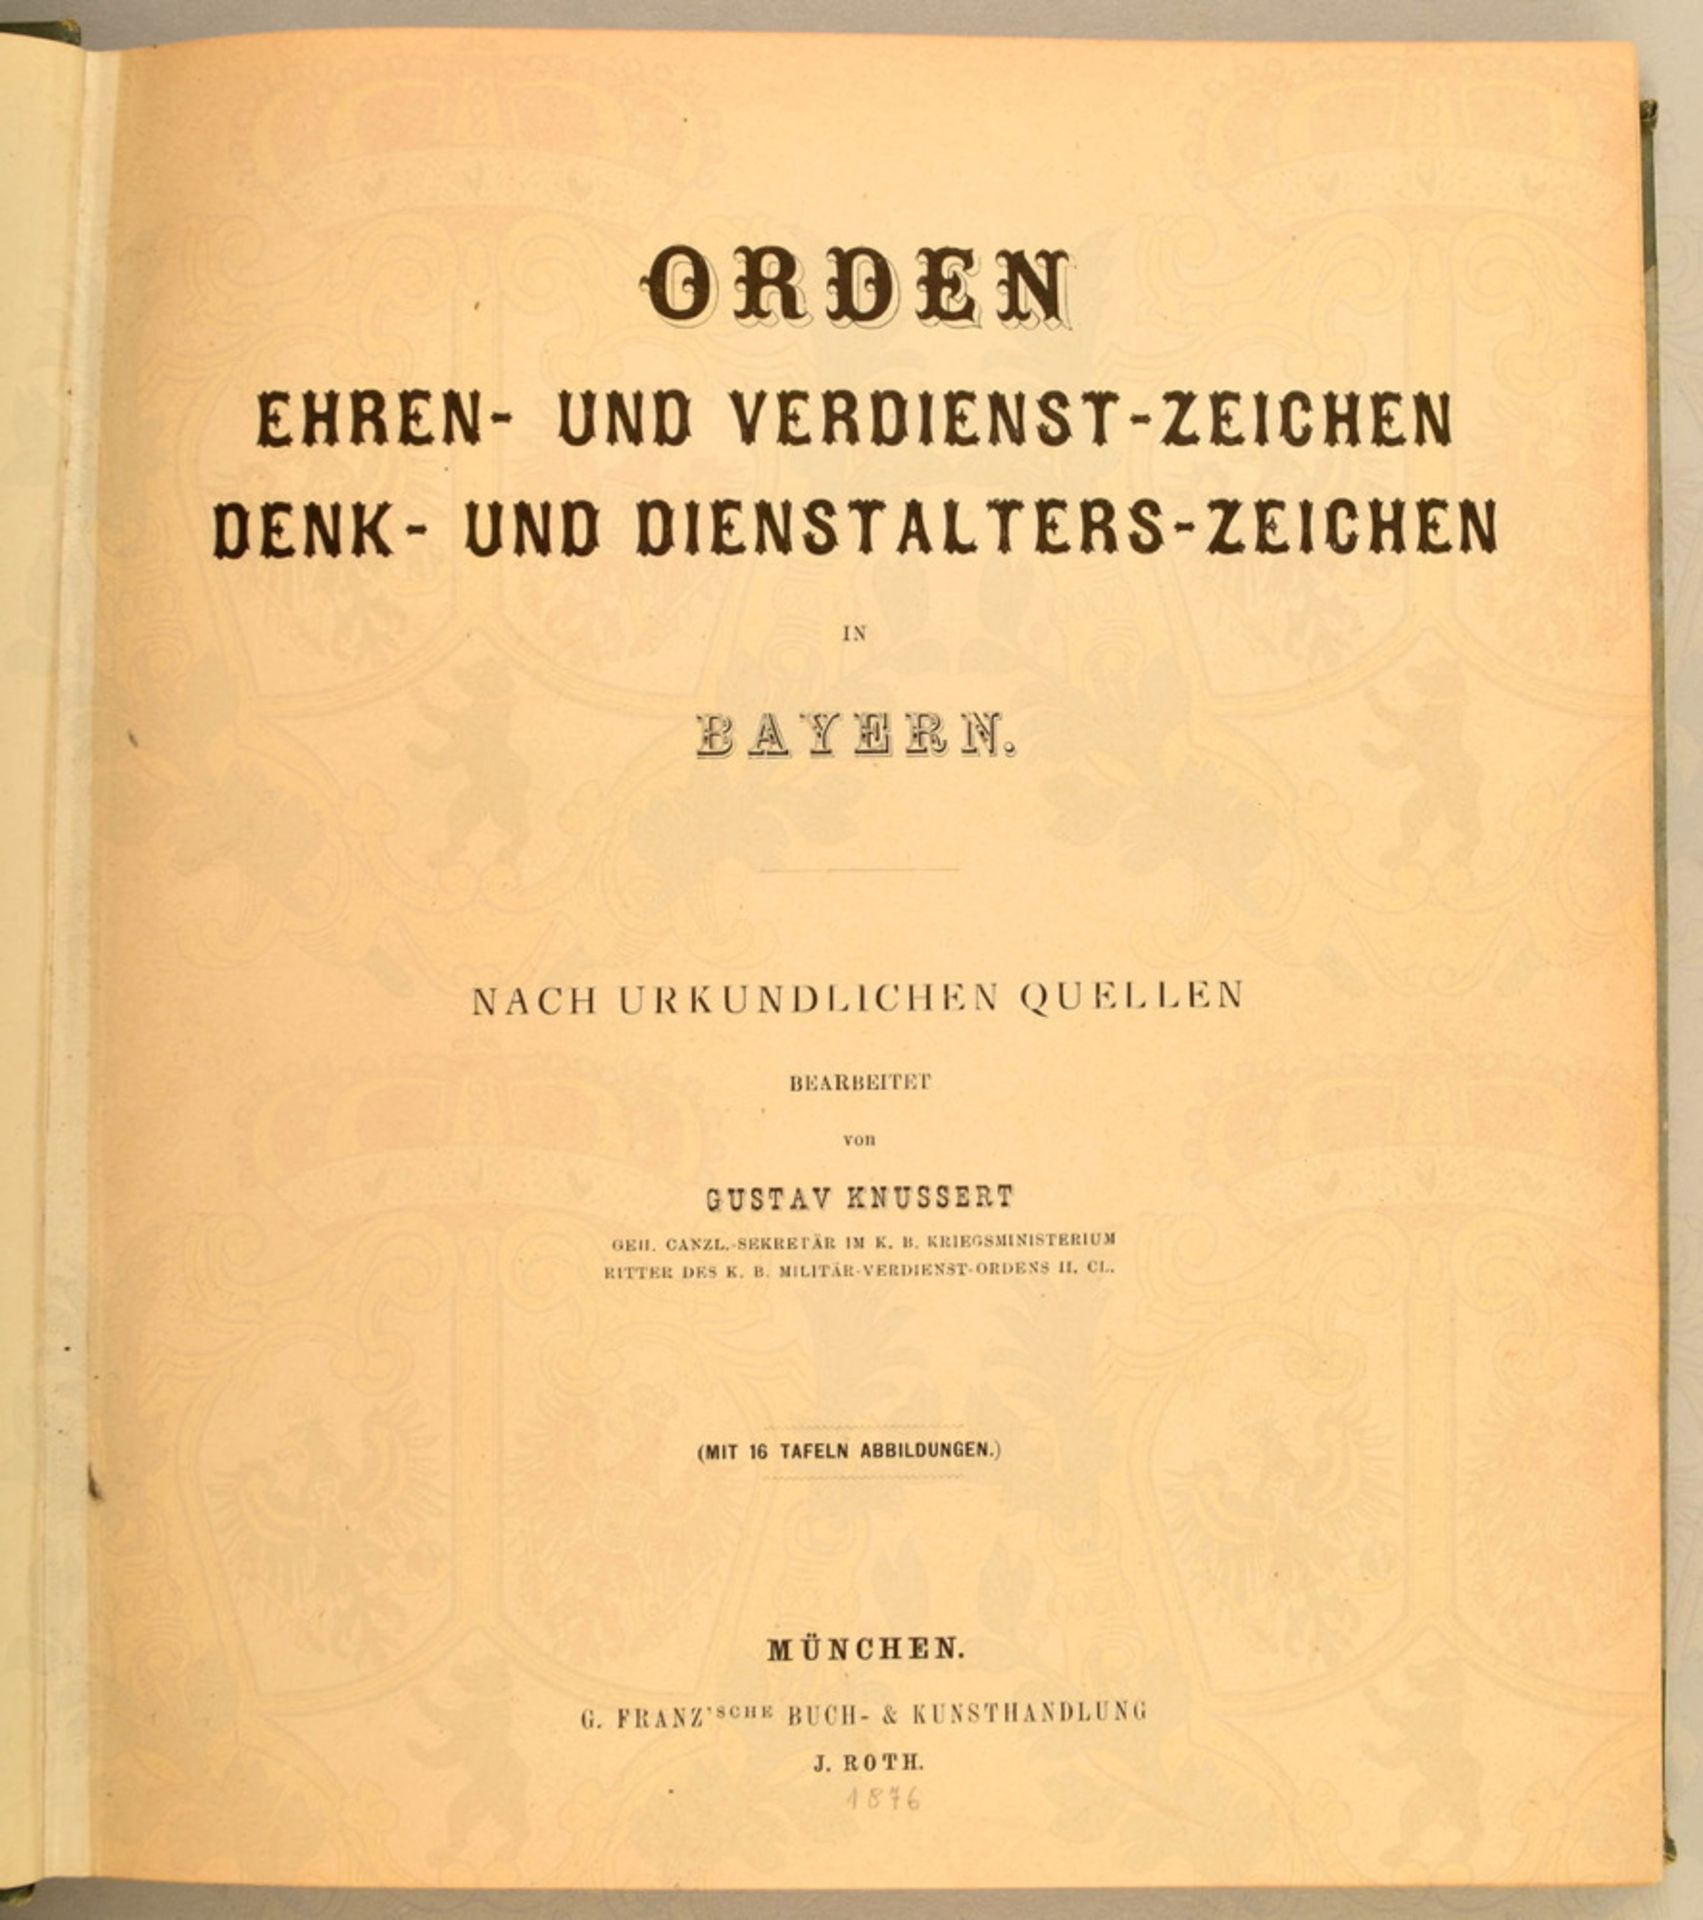 Reference book on Bavarian orders and decorations of 1876